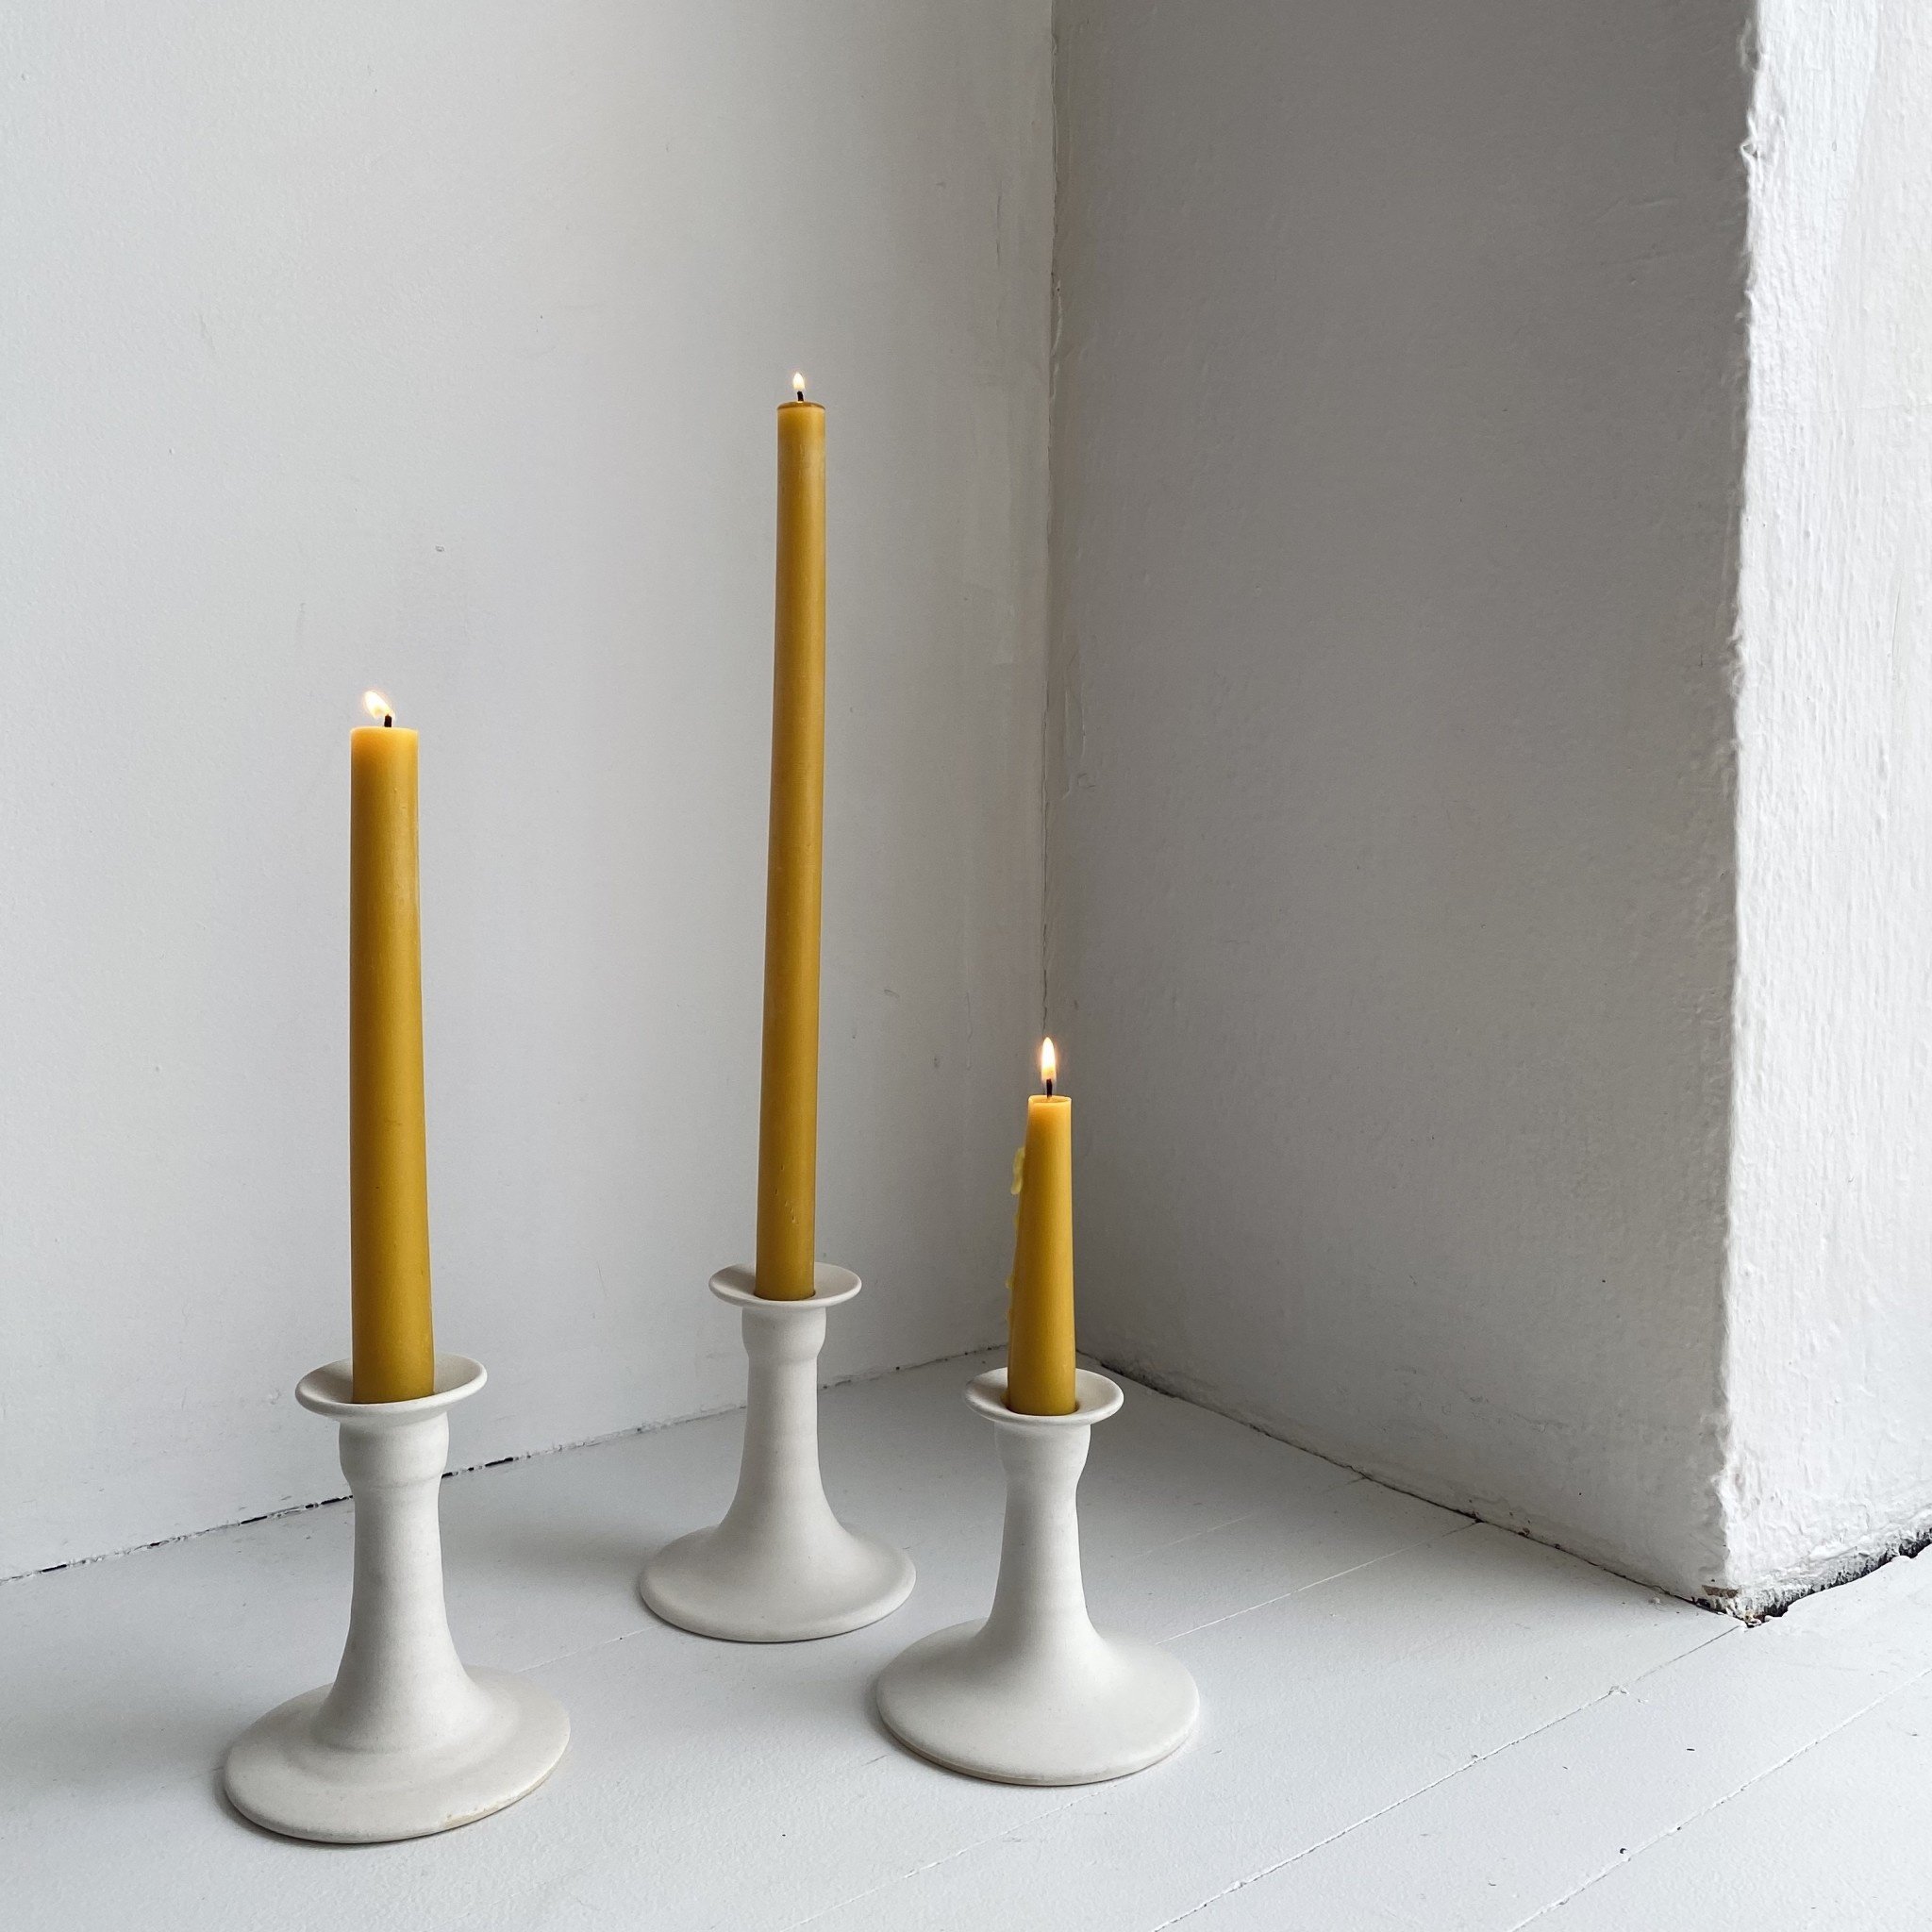 The Foundry Home Goods Foundry Classic Taper Candle Holder - Medium - Matte Glaze